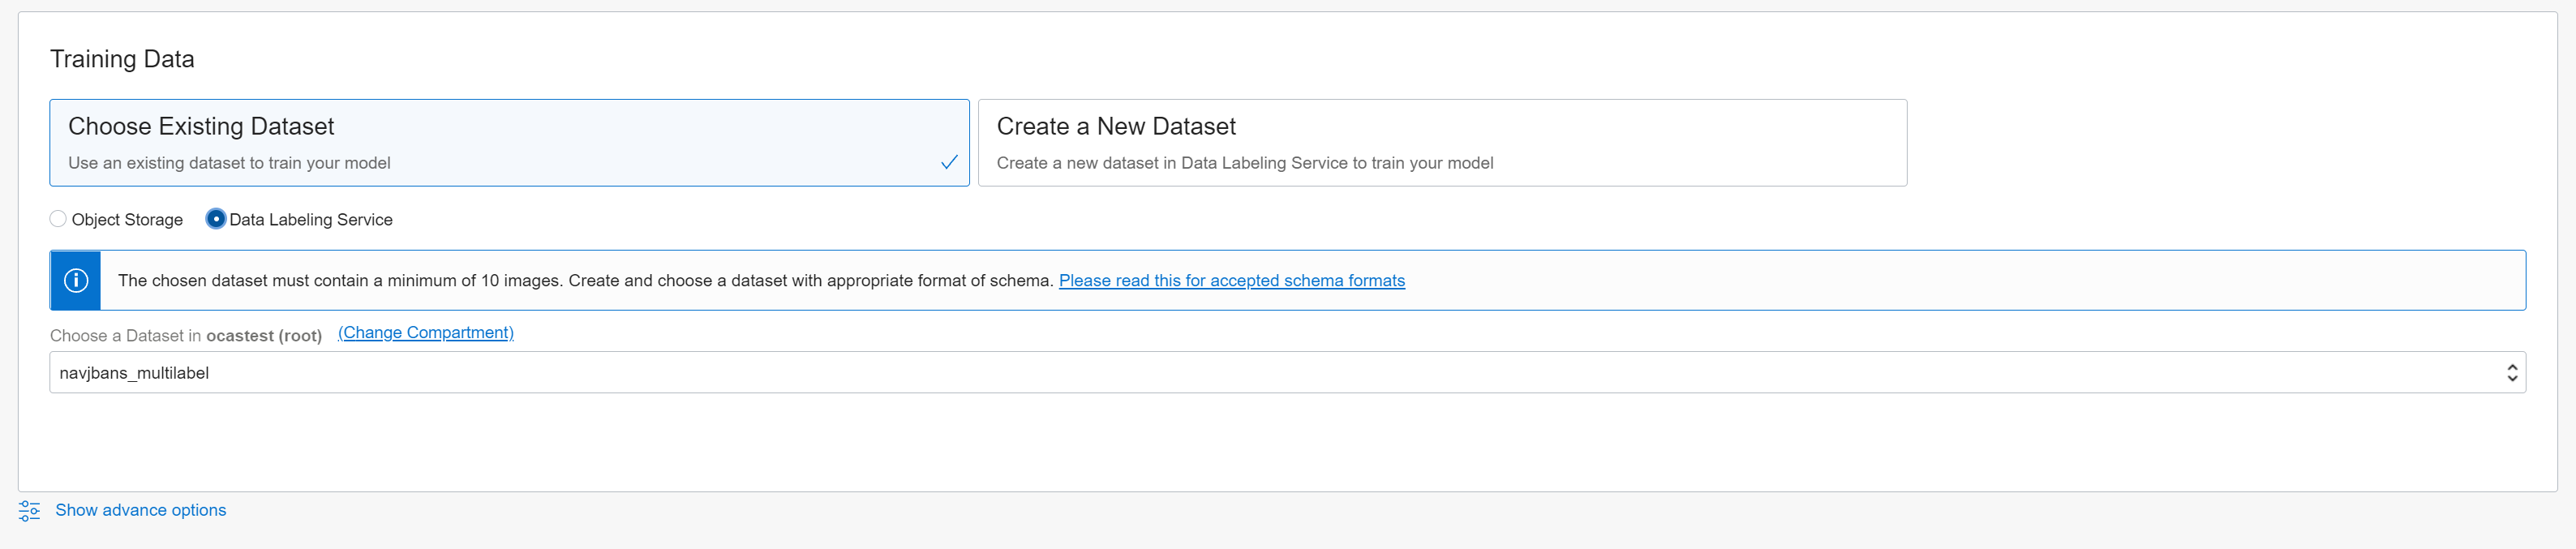 Choose Existing Dataset selected, as is Data Labeing Service. A dataset is seelcted from the list.